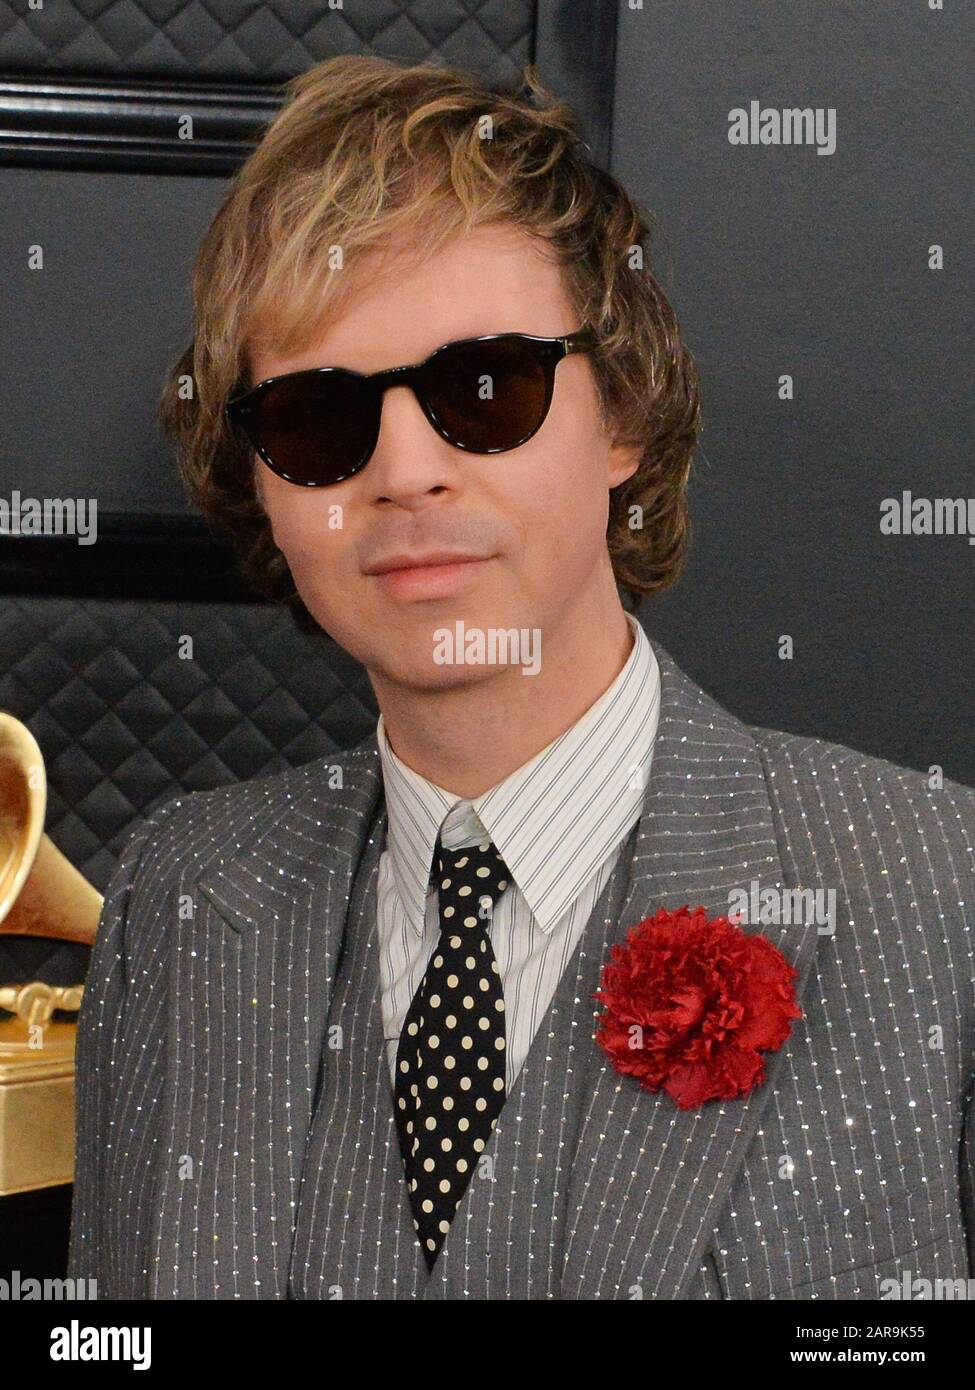 Los Angeles, USA. 26th Jan 2020. Beck arrives for the 62nd annual Grammy Awards held at Staples Center in Los Angeles on Sunday, January 26, 2020. Photo by Jim Ruymen/UPI Credit: UPI/Alamy Live News Stock Photo